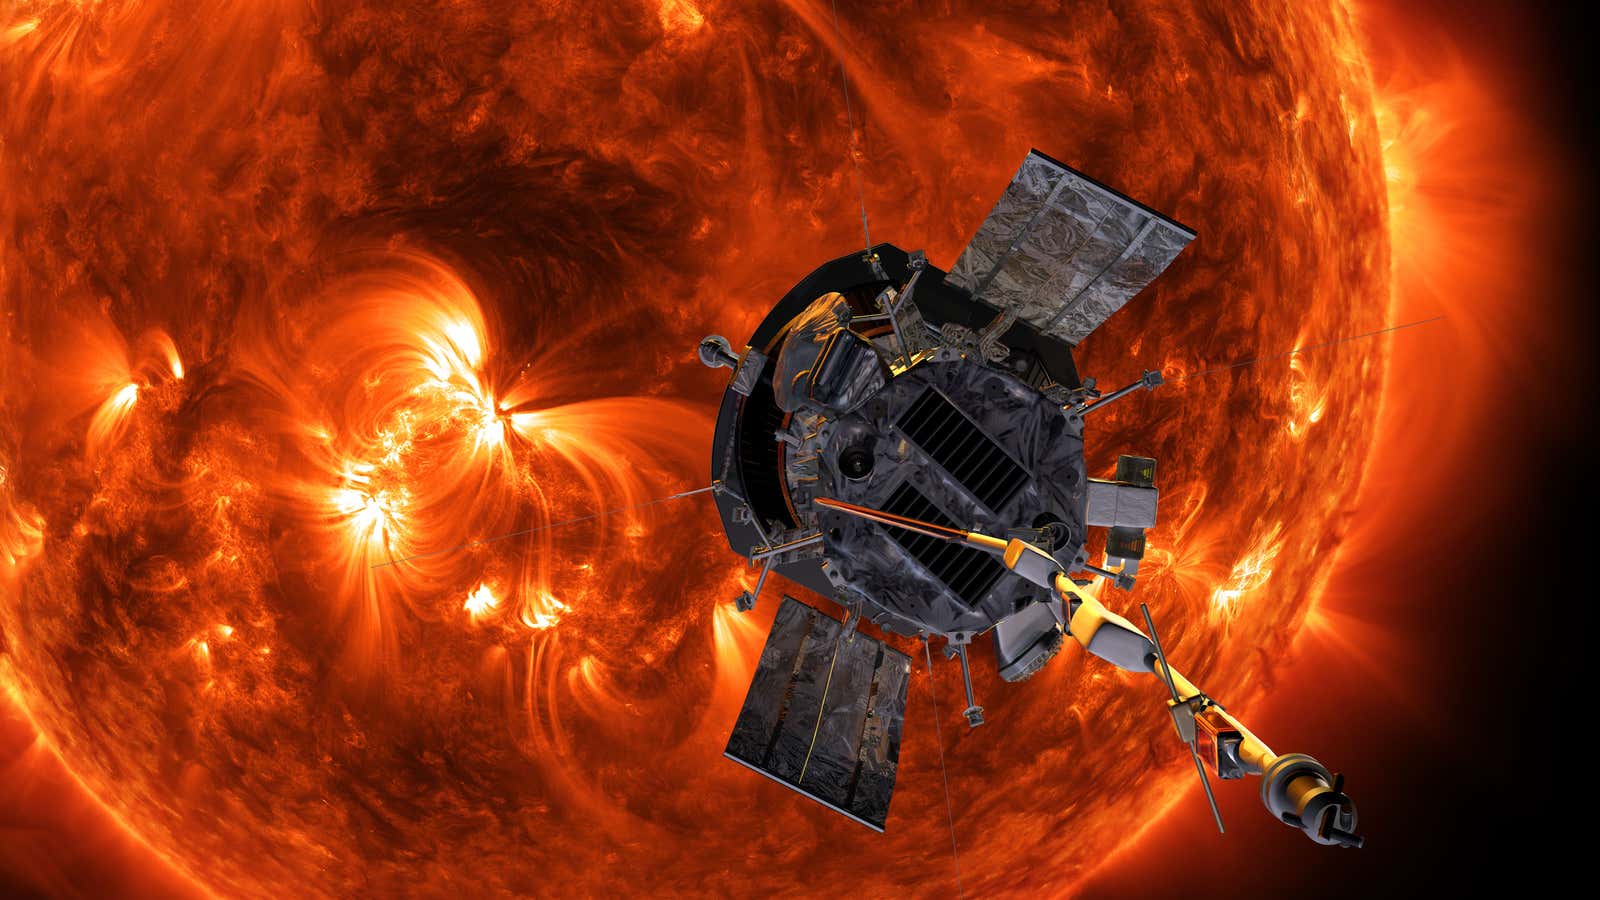 In 2024, the Parker Solar Probe will break its own records for speed and distance from the sun.